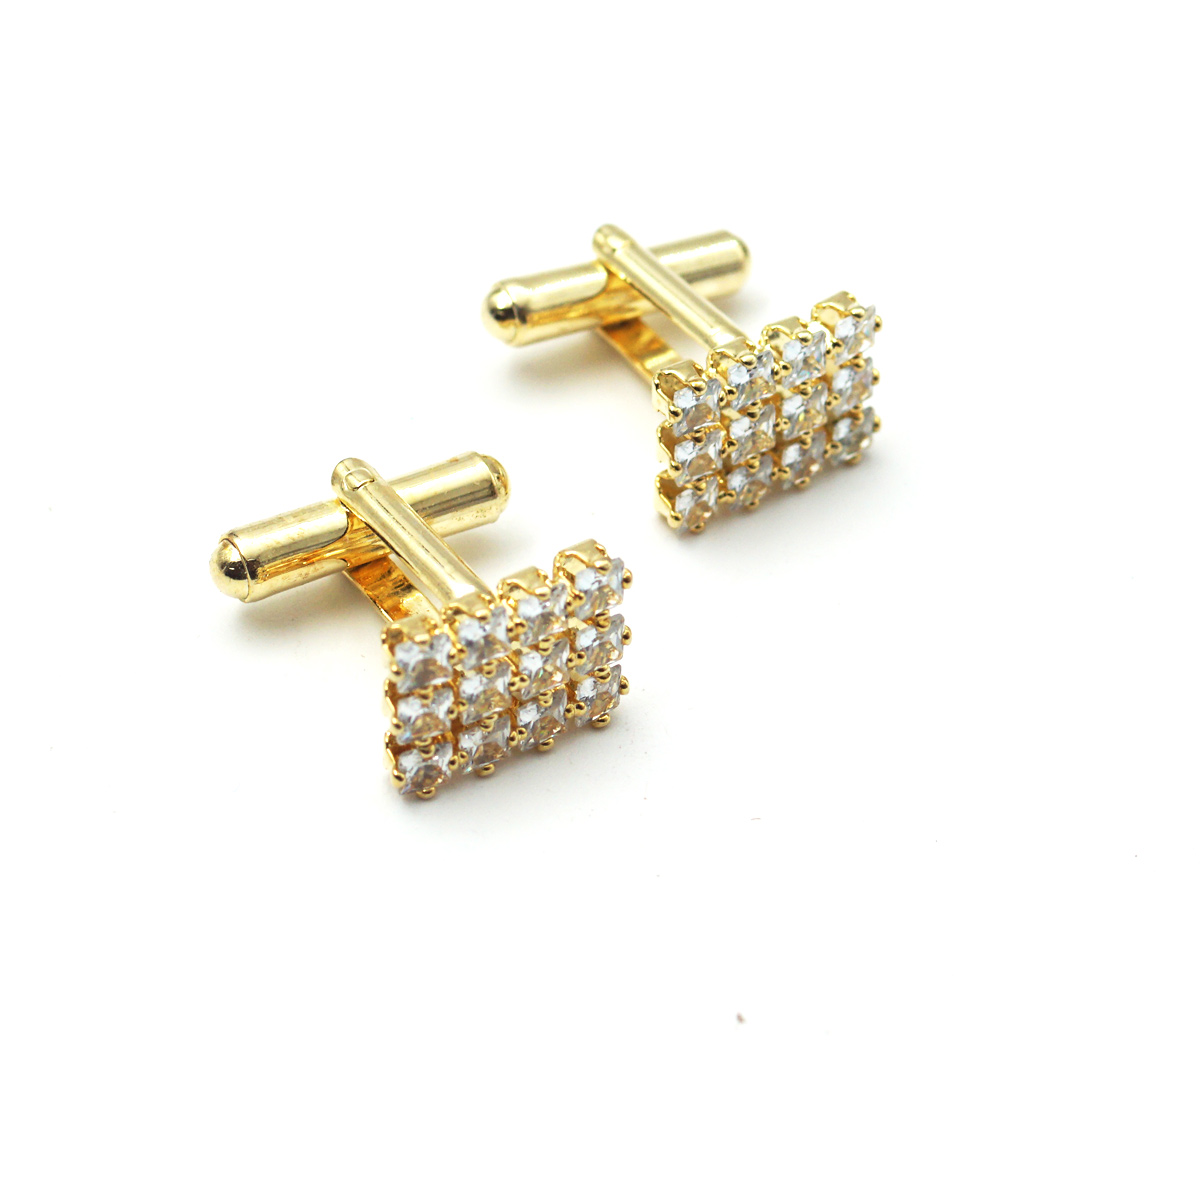 penhose.in Gold With White Stone Cufflinks For Men SKU 87370